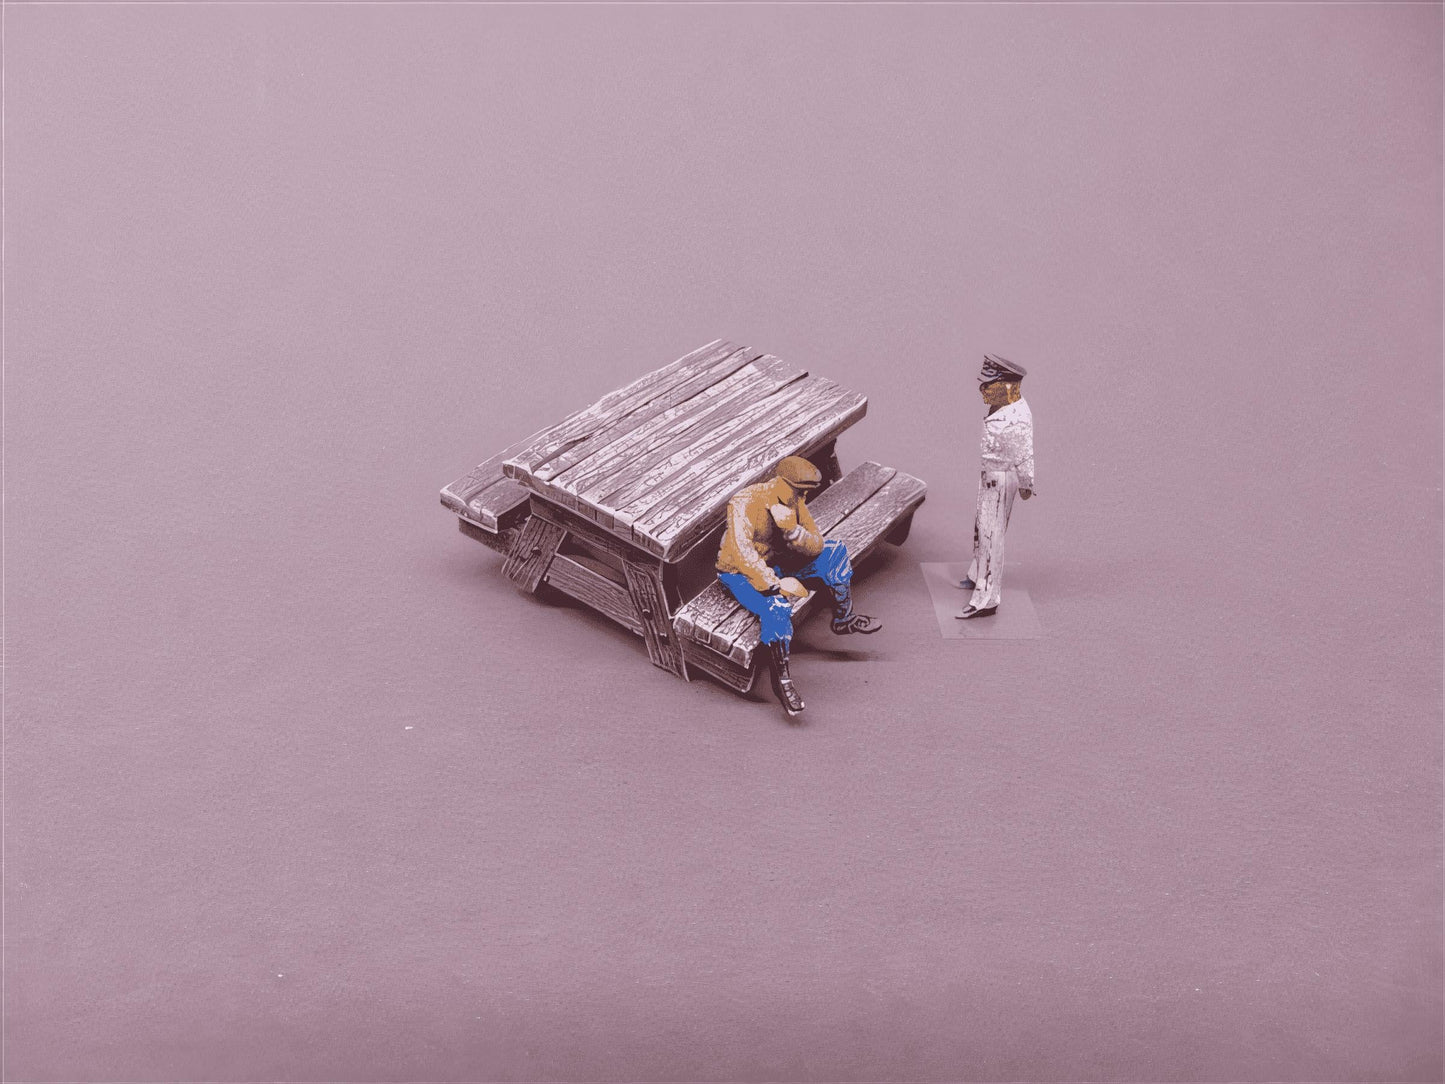 1:43 scale 'O' Gauge picnic table